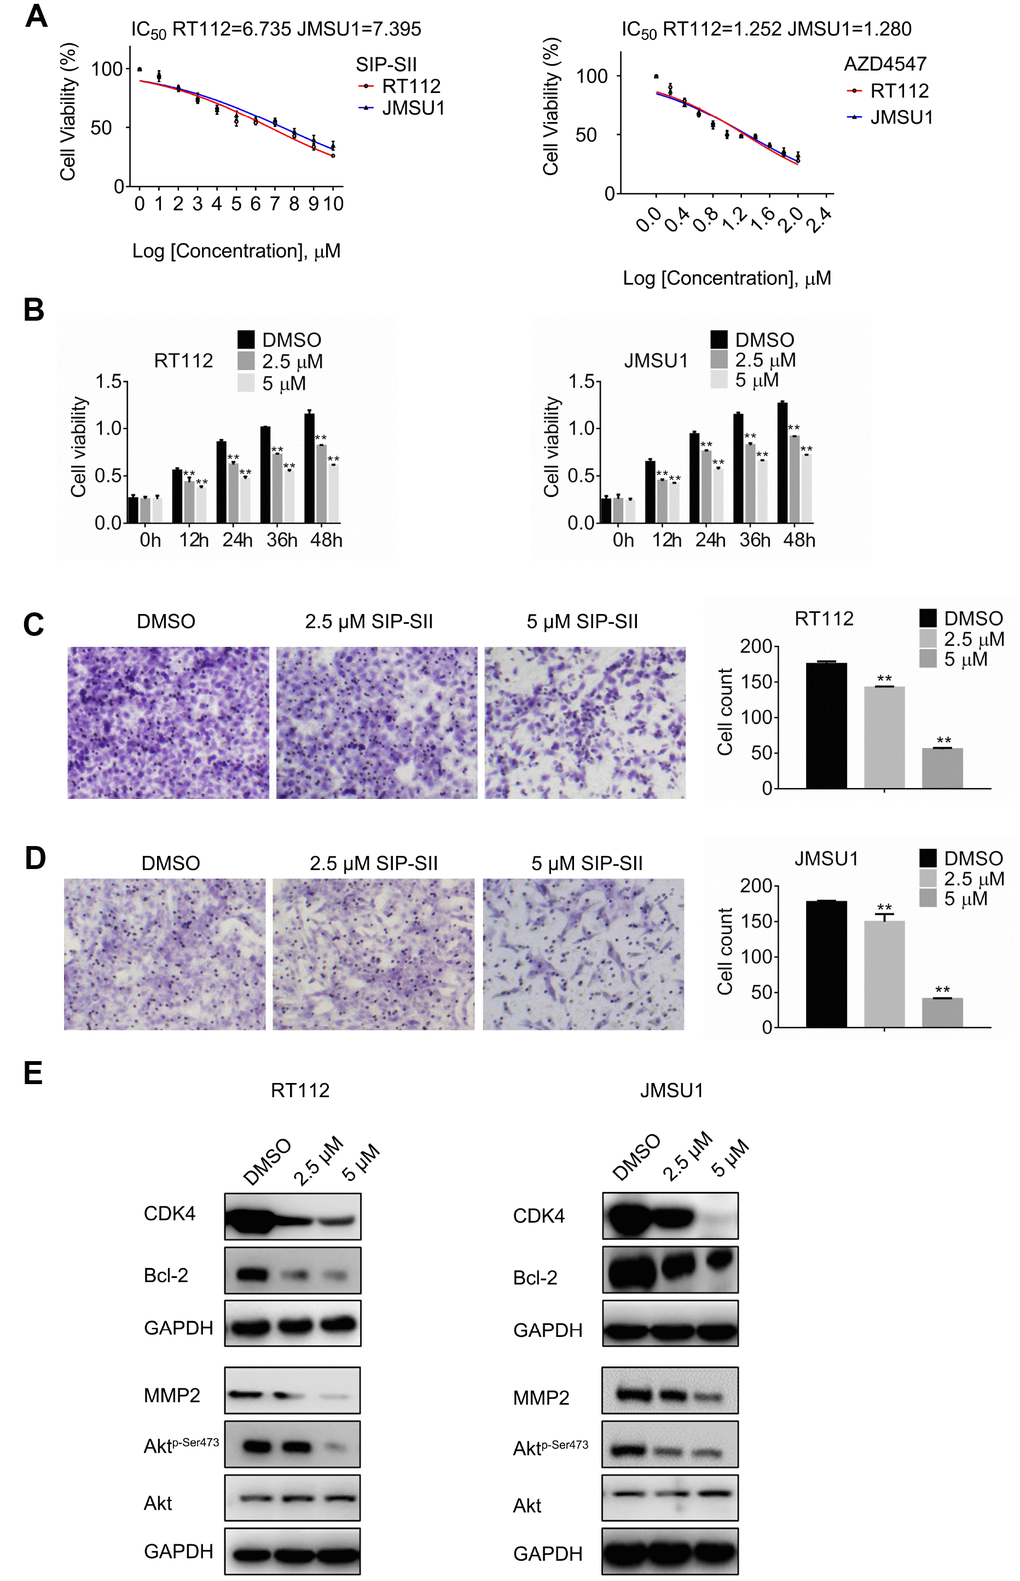 SIP-SII impairs proliferation and migration and attenuates Akt signaling in bladder cancer cells. (A) Half-maximum inhibitory concentration (IC50) of test drugs evaluated through the MTT viability assay. (B) Cell viability (MTT) assay results for RT112 and JMSU1 cells treated respectively with 2.5 μM or 5μM SIP-SII for the indicated time-points. Cell migration assay results for RT112 cells (C) and JMSU1 cells (D) treated respectively with 2.5 μM or 5.0 μM SIP-SII for 24 h. Representative images at 200x magnification. Data are mean ± SD (error bars) of three experiments performed in triplicate. **P E) Western blot analysis of total Akt, phospho-Akt, CDK4, Bcl-2, and MMP2 24 h post-exposure to SIP-SII (RT112: 2.5 μM; JMSU1: 5.0 μM).